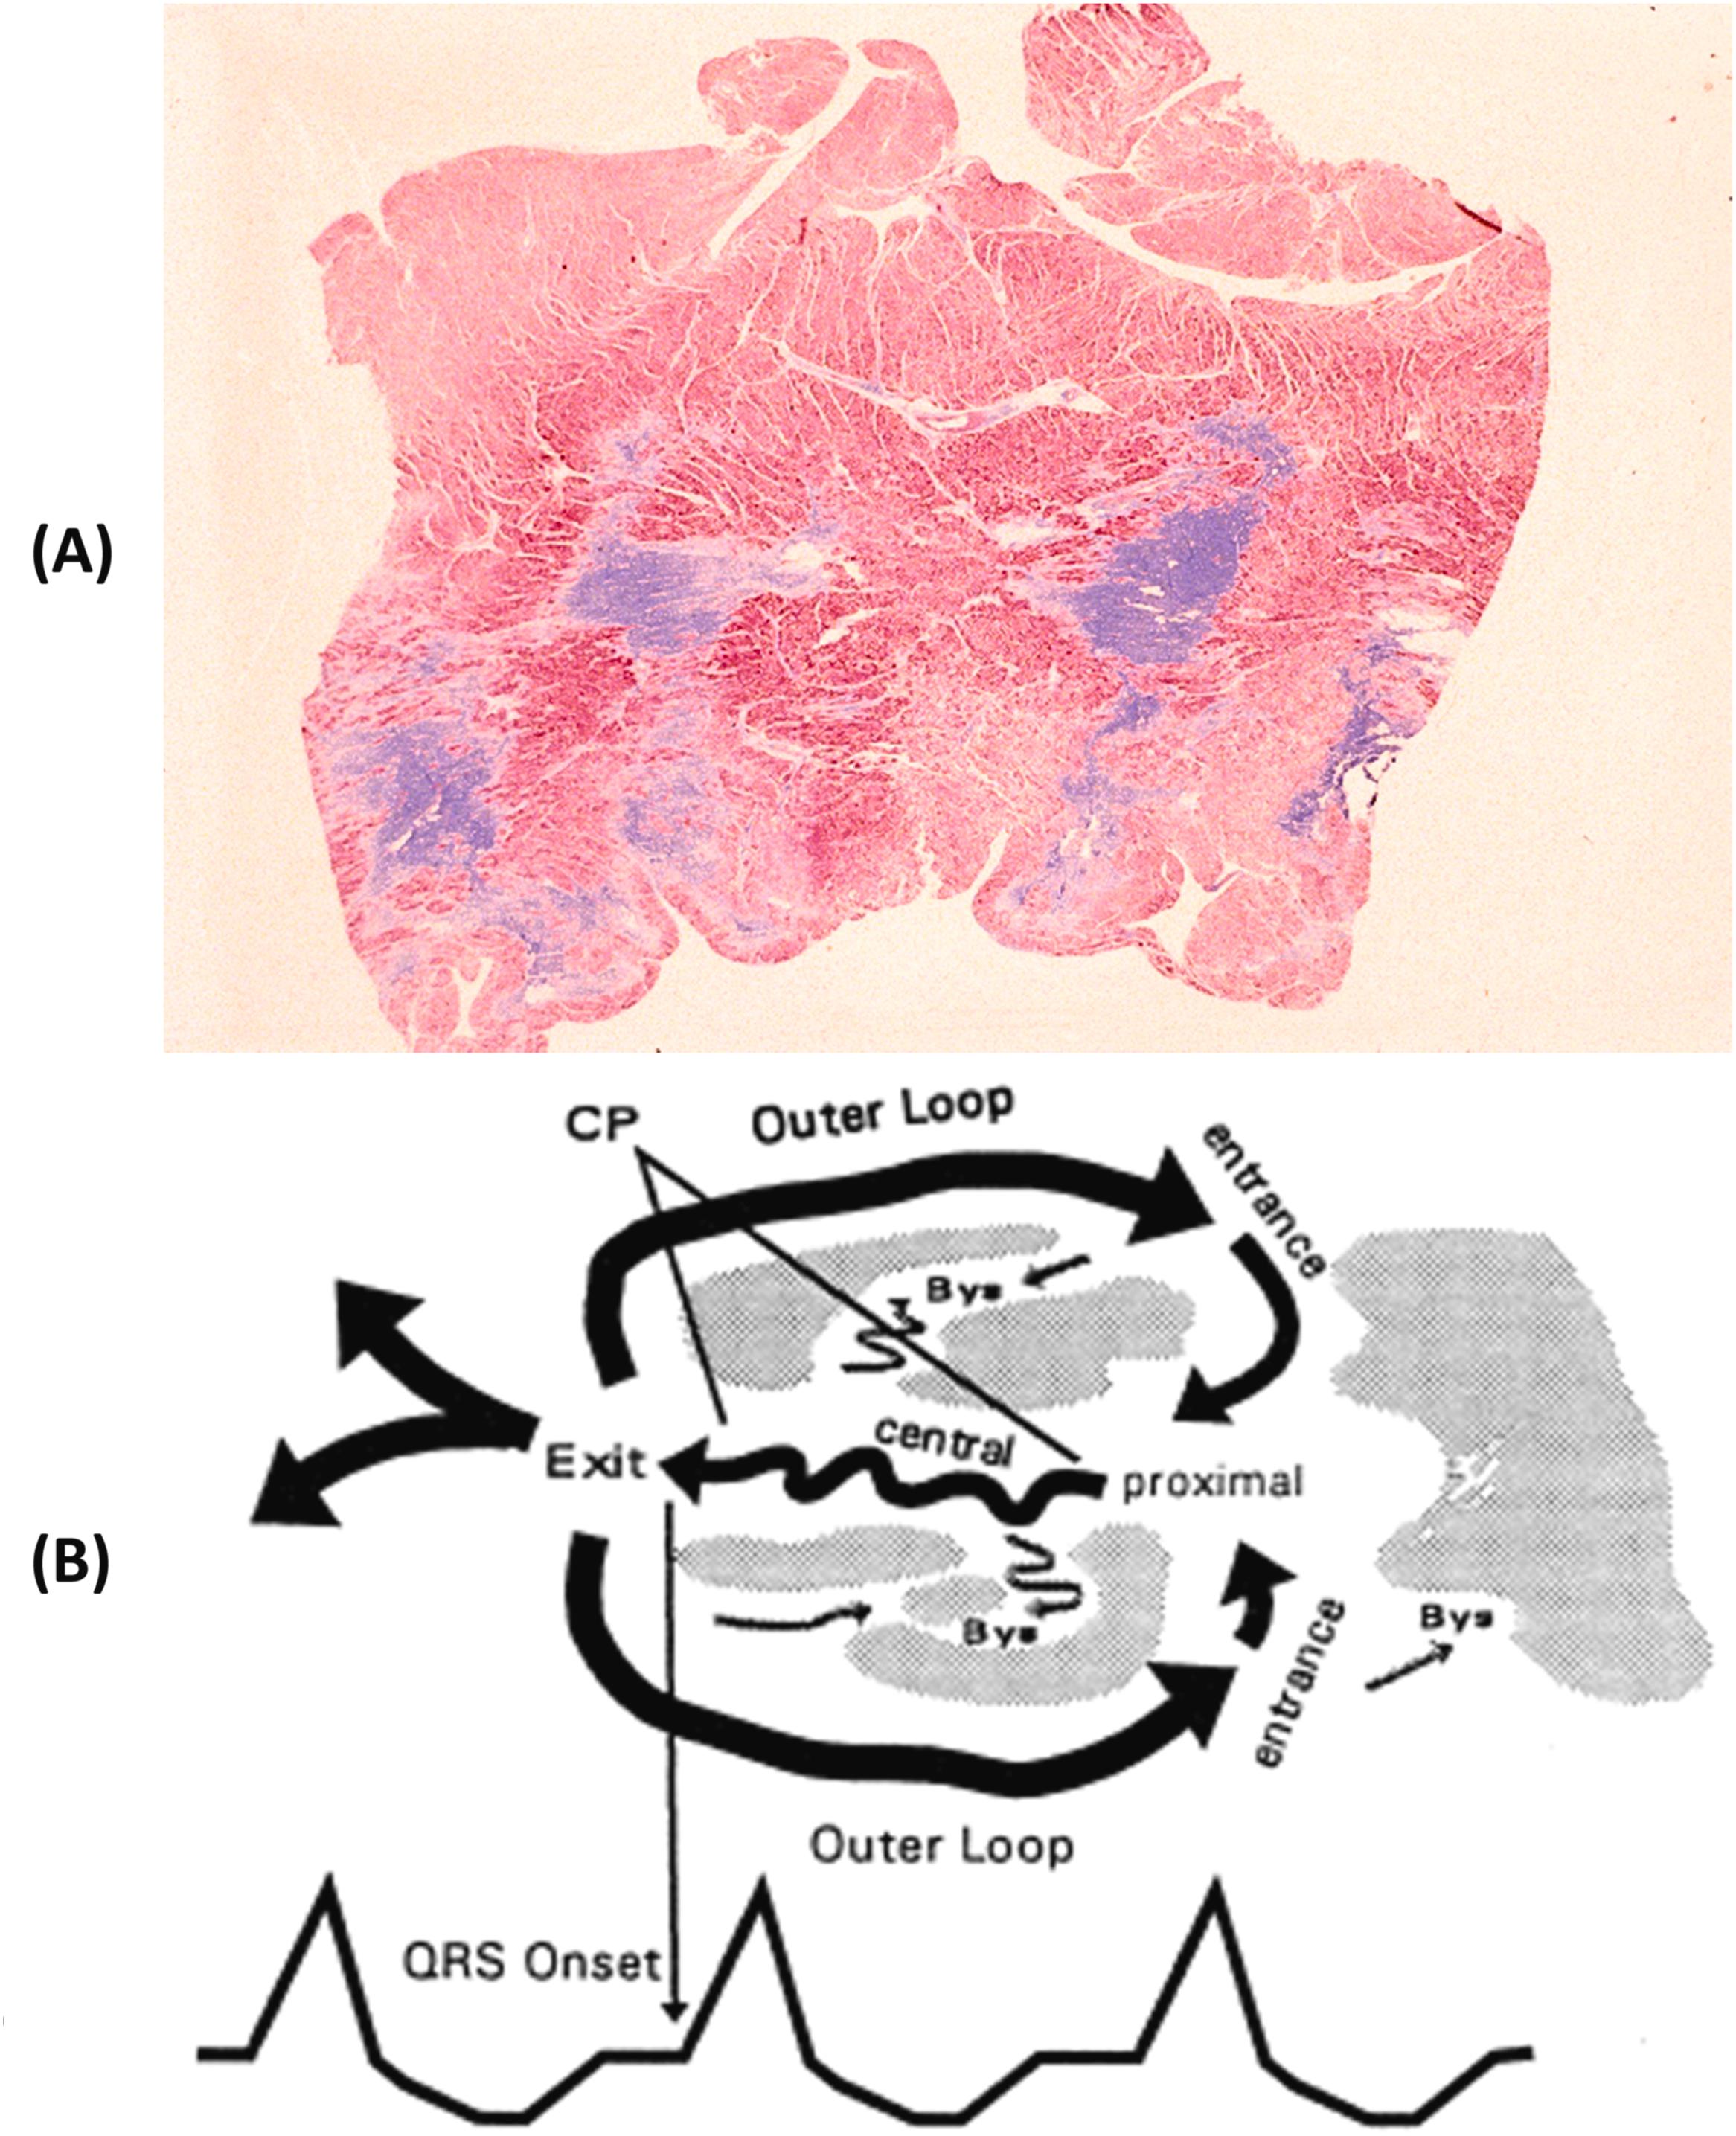 Figure 11.16, (A) Arrhythmic sudden cardiac death in a healed myocardial infarction. “Archipelago-like” spots of replacement-type fibrosis are scattered in the anteroseptal wall of the left ventricle accounting for a “zig zag” intraventricular impulse propagation (Heidenhain trichrome). (B) Circuit that contains two loops and a common pathway (CP) through which conduction is slowed, creating a “figure-eight” configuration. The common pathway is a relatively small mass of tissue in the chronic infarct, depolarization of which generates low amplitude signals that are not detectable in the standard body surface ECG. The common pathway has an exit and central and proximal regions. The QRS complex is inscribed after the excitation wavefront leaves the common pathway at the exit ( arrow to the QRS onset at bottom) and begins propagating around the border of the scar through two outer loops. The excitation wavefronts then enter the infarct region through entrances to reach the proximal portion of the common pathway. Several regions that are in the chronic infarct but do not participate in the circuit are labeled as bystanders (Bys).